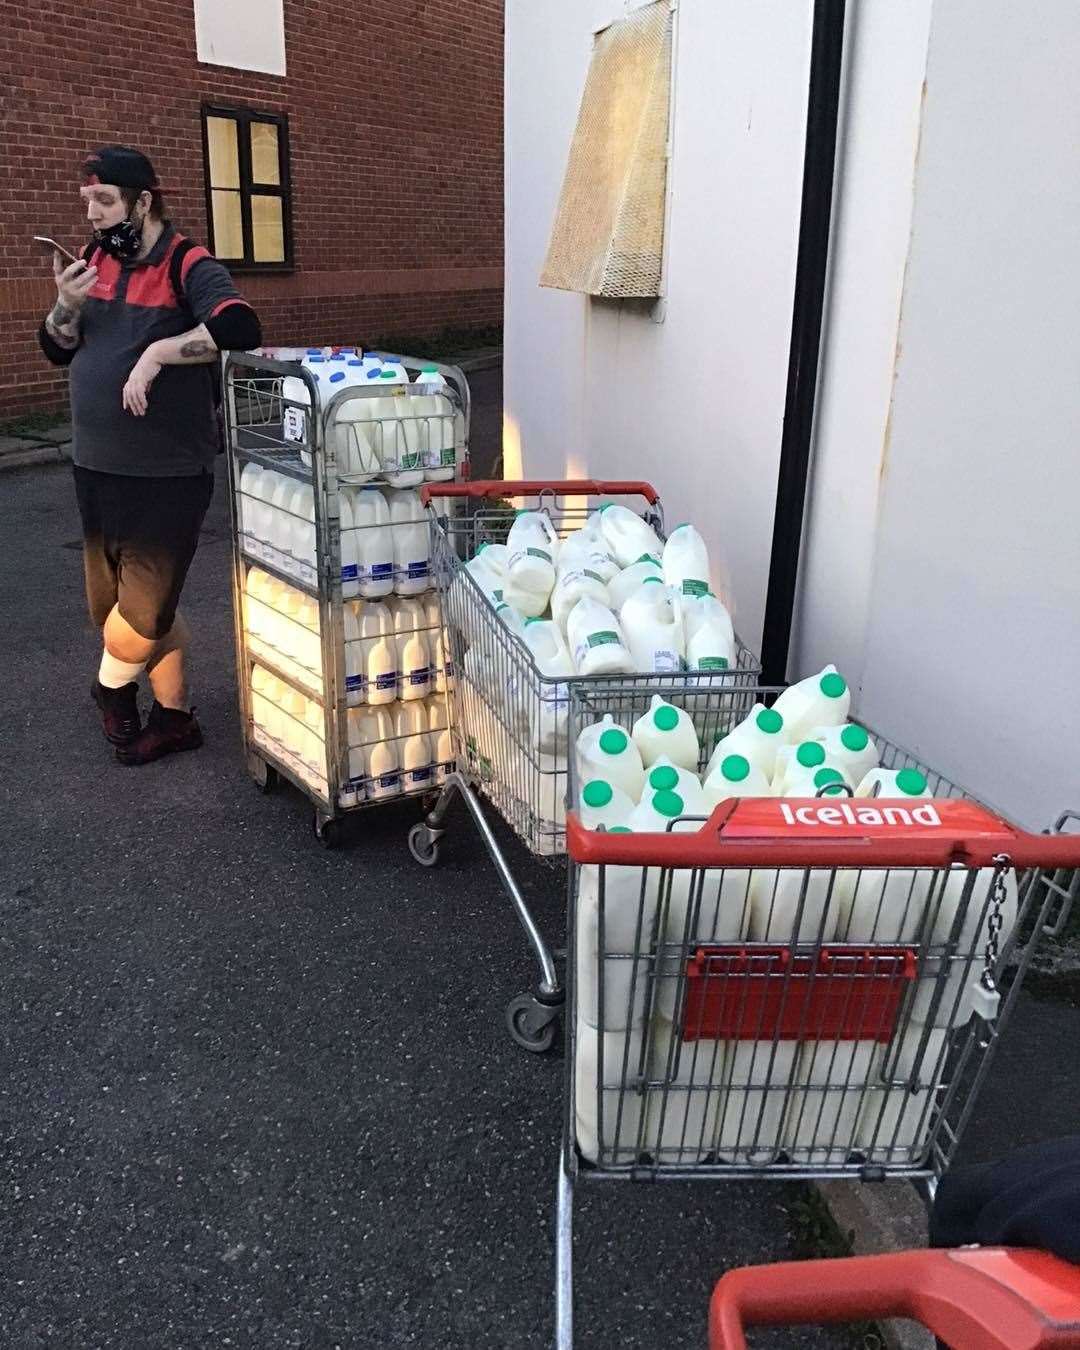 Iceland in Deal donated leftover items such as milk to United Families UK